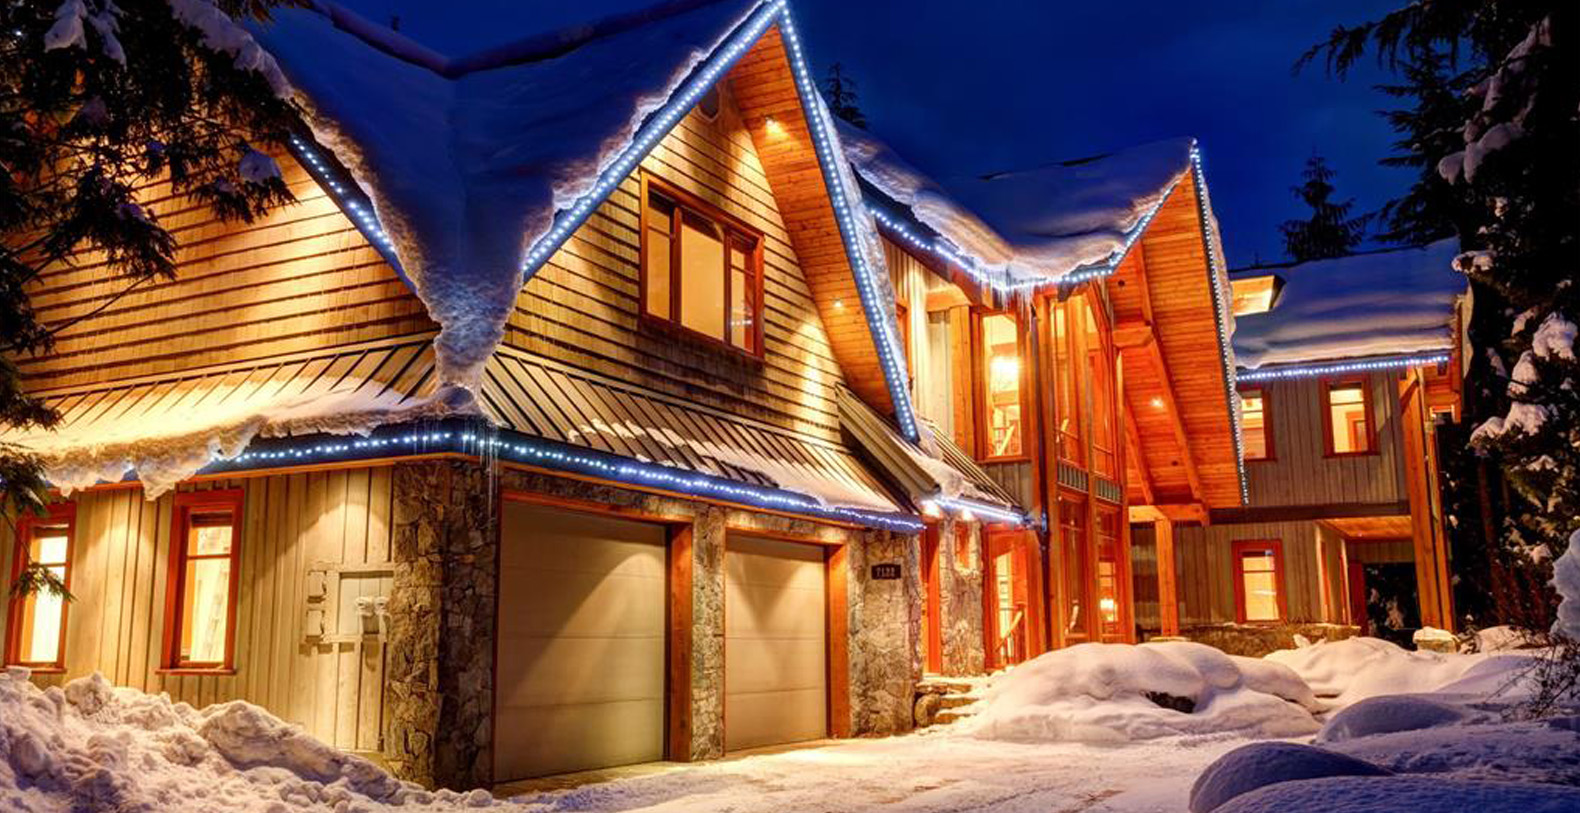 Timber Luxury Chalet Holiday Rental